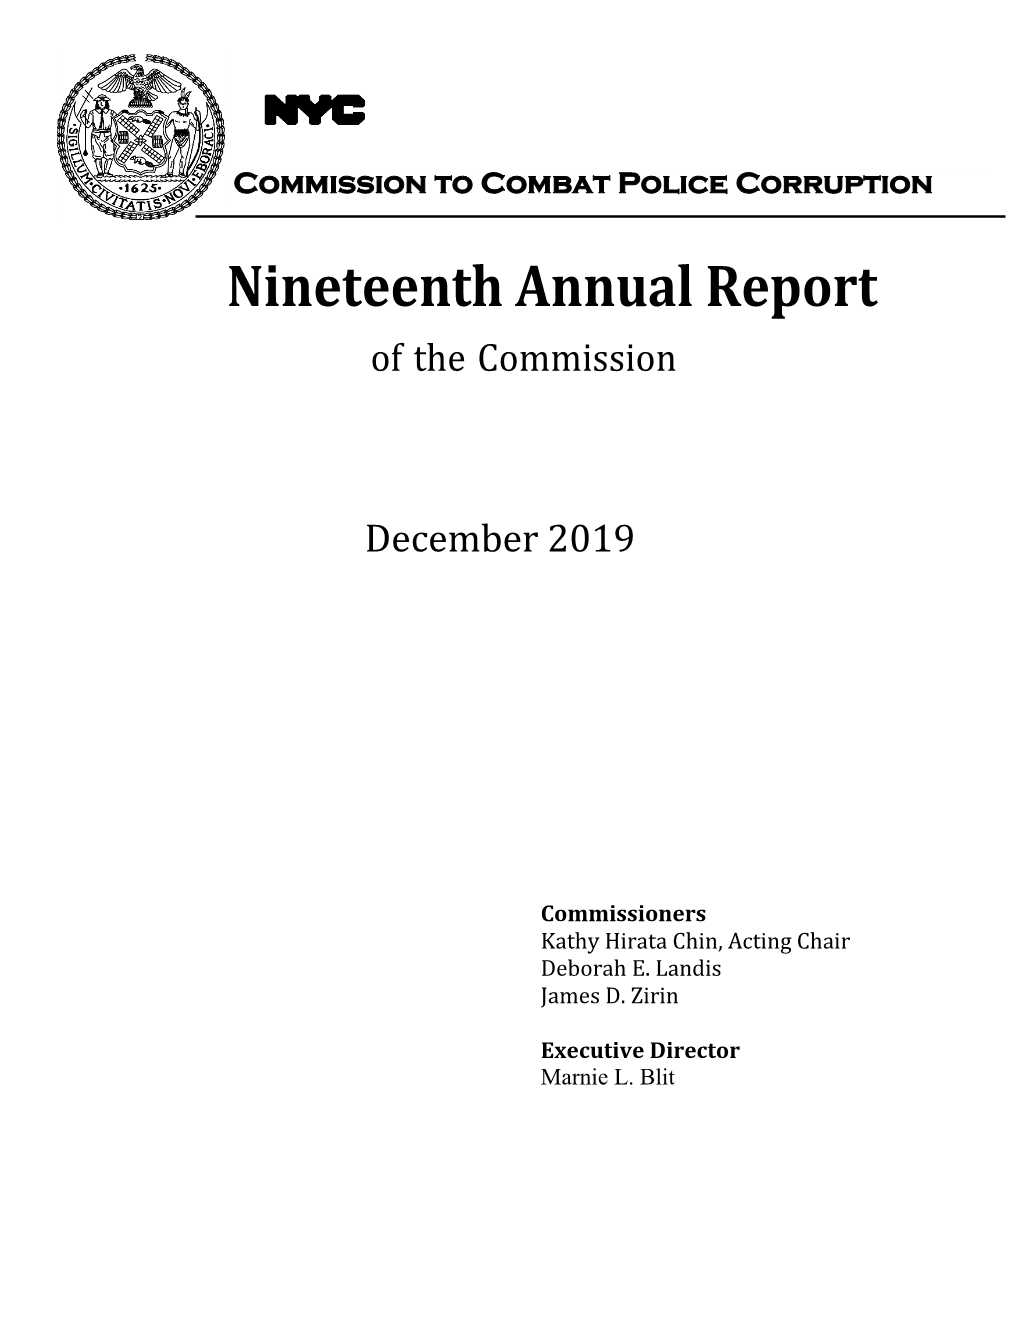 Nineteenth Annual Report of the Commission